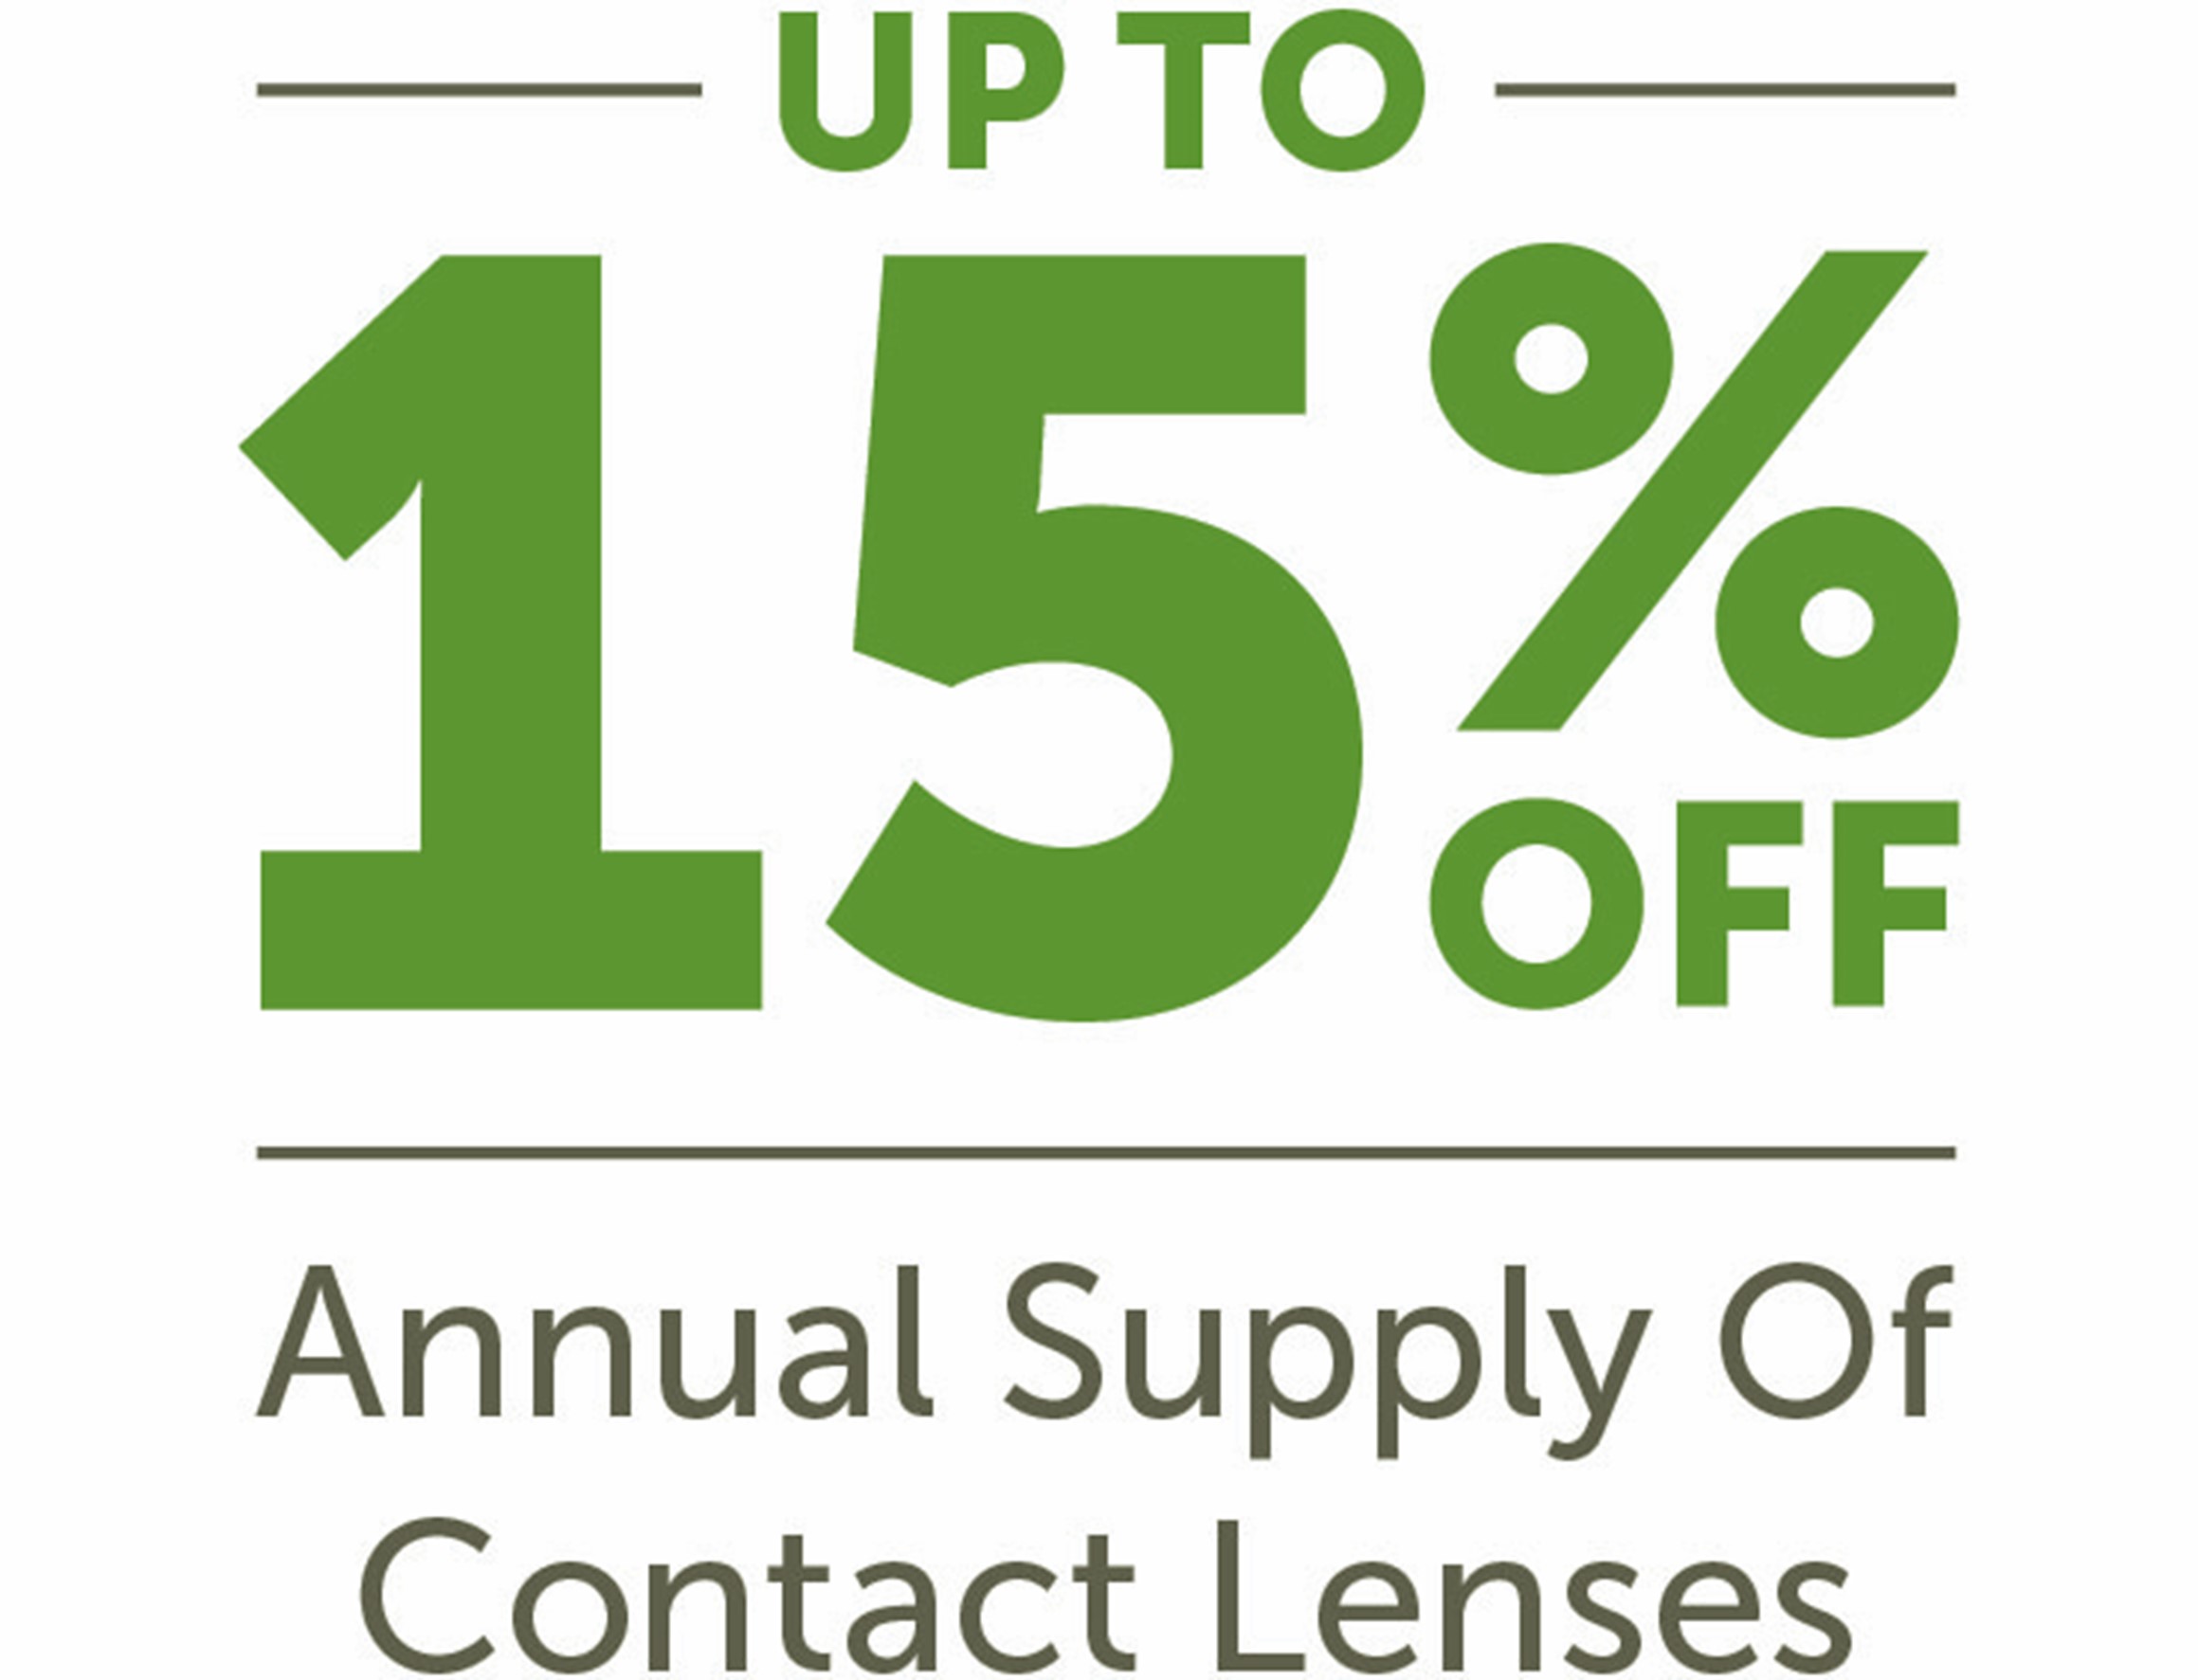 pearle vision offer - UP TO 15% OFF